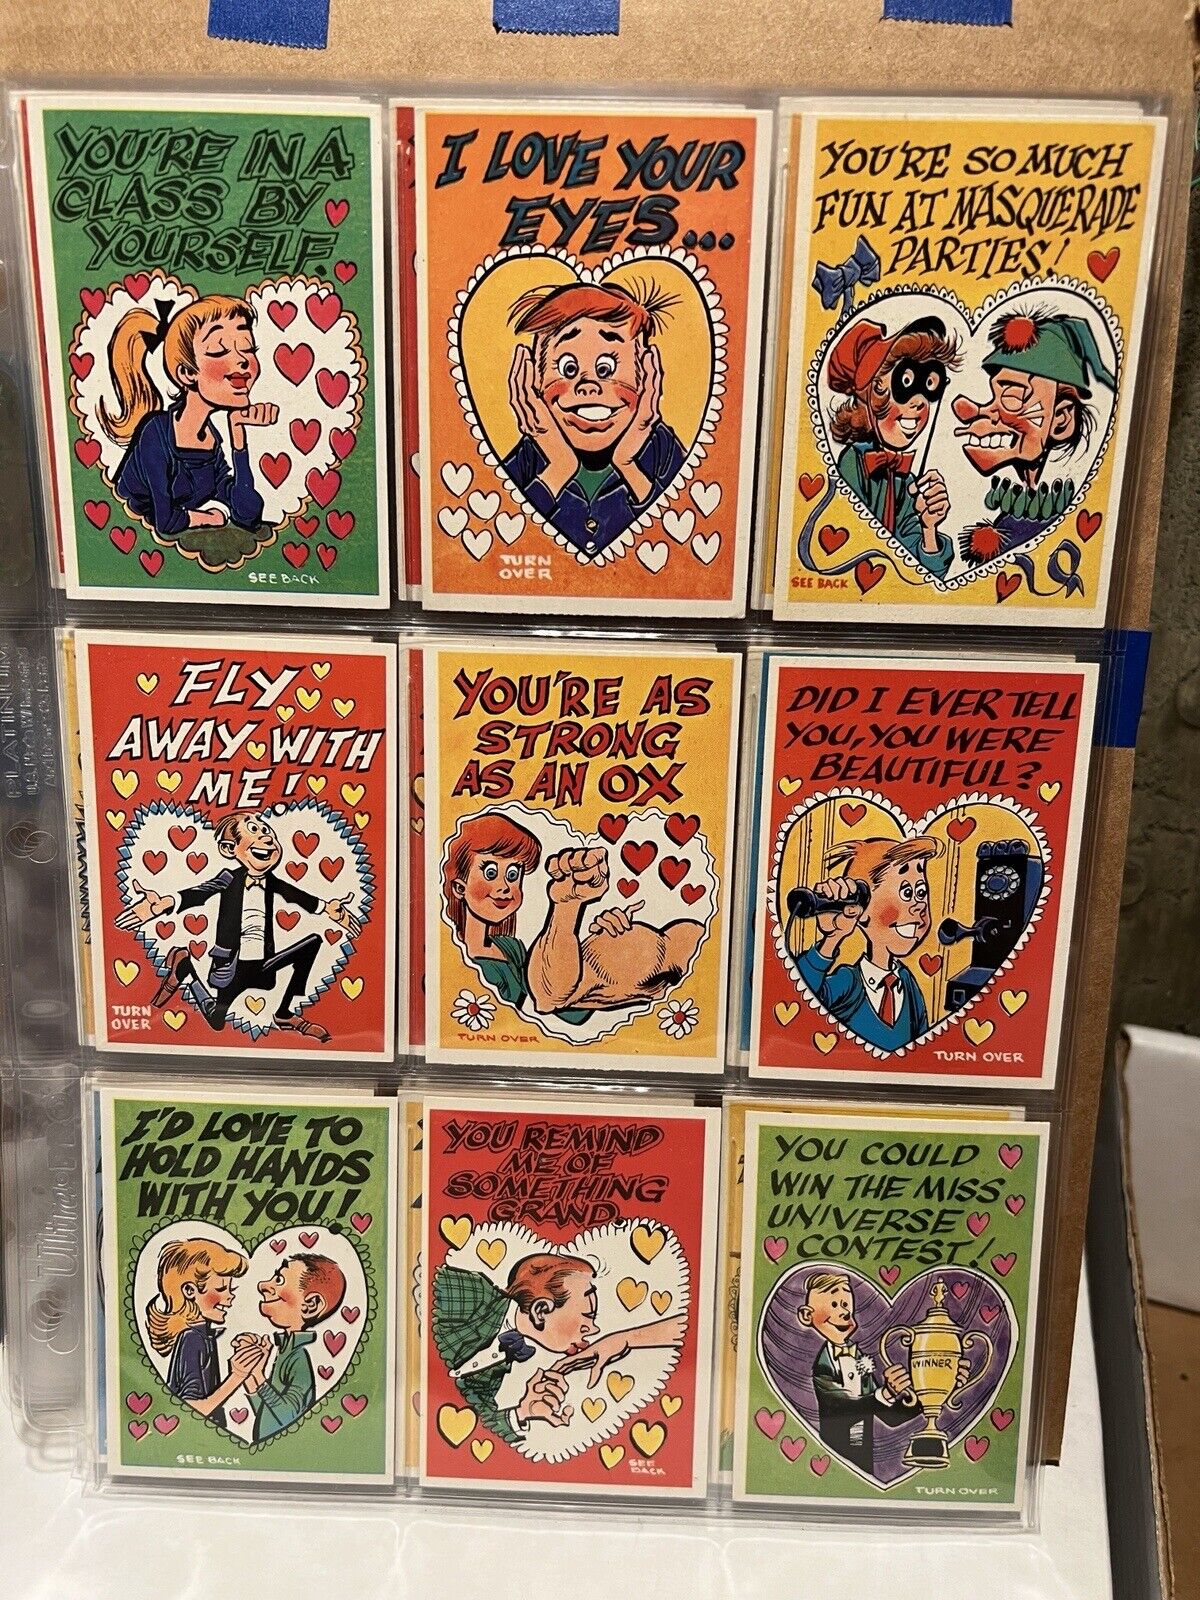 1960 TOPPS CHEWING GUM FUNNY VALENTINE COLLECTOR CARD FULL SET (1A-66A)